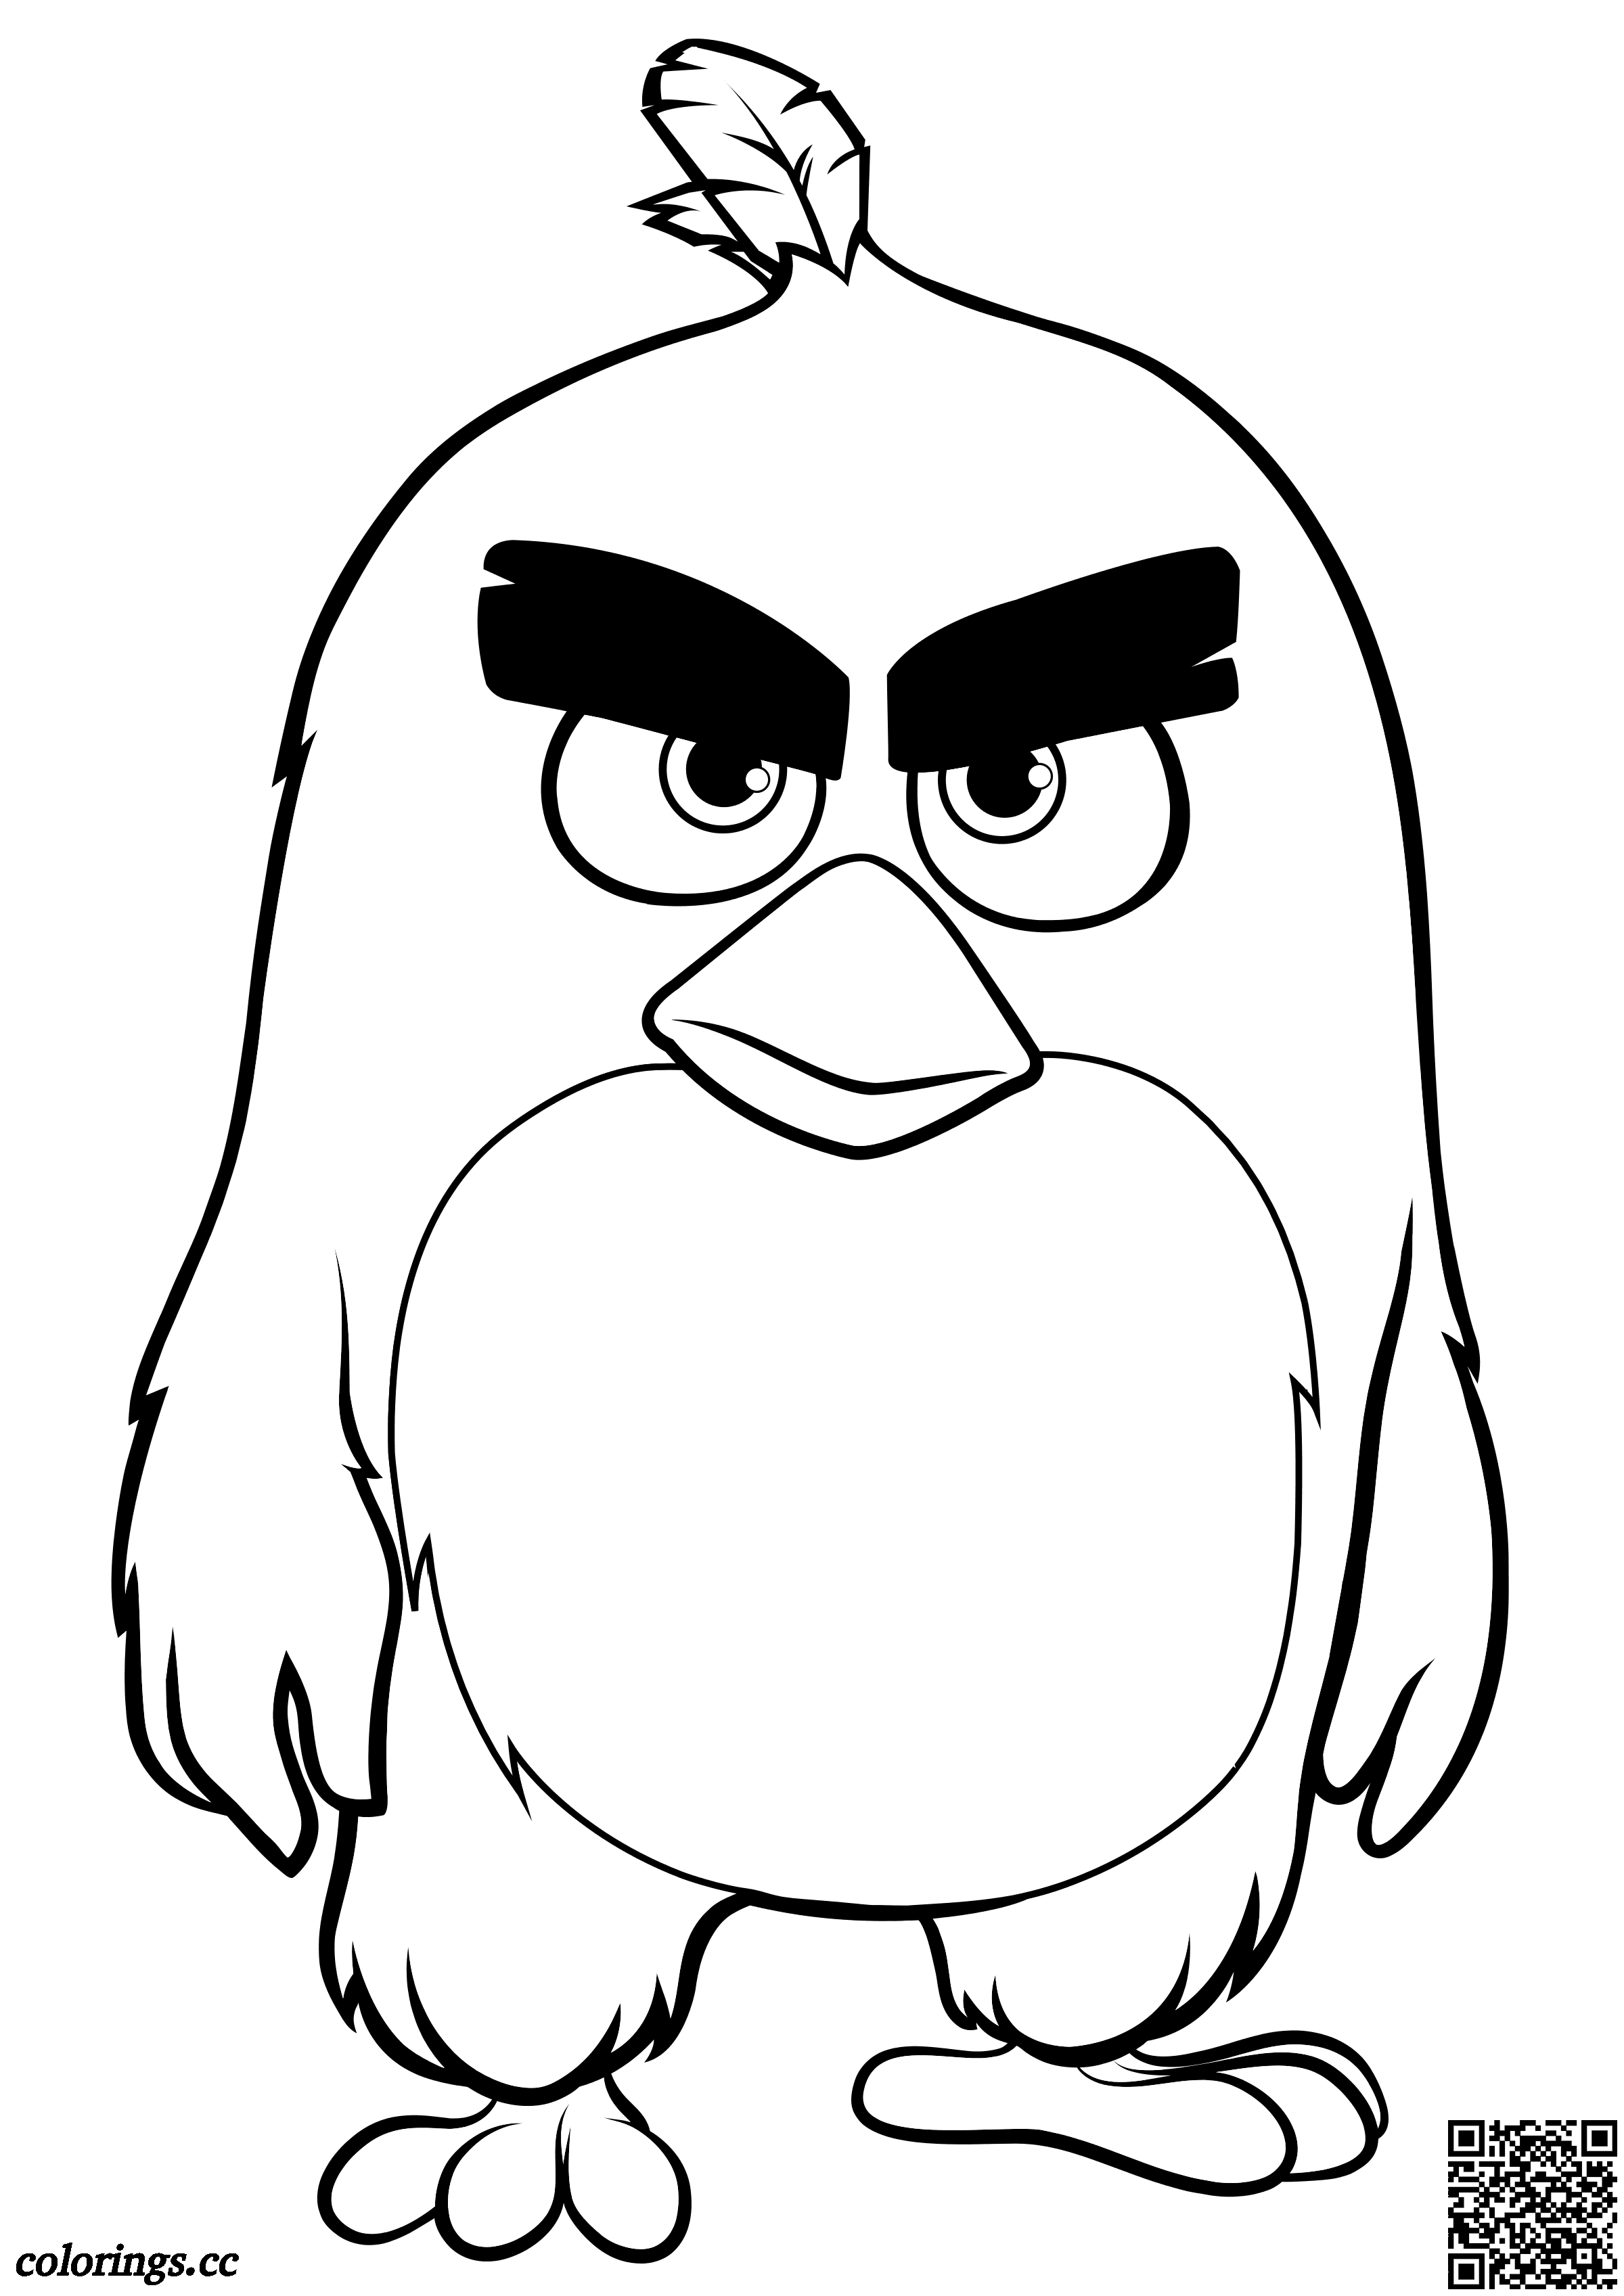 Red coloring pages, Angry Birds in the movies coloring pages ...